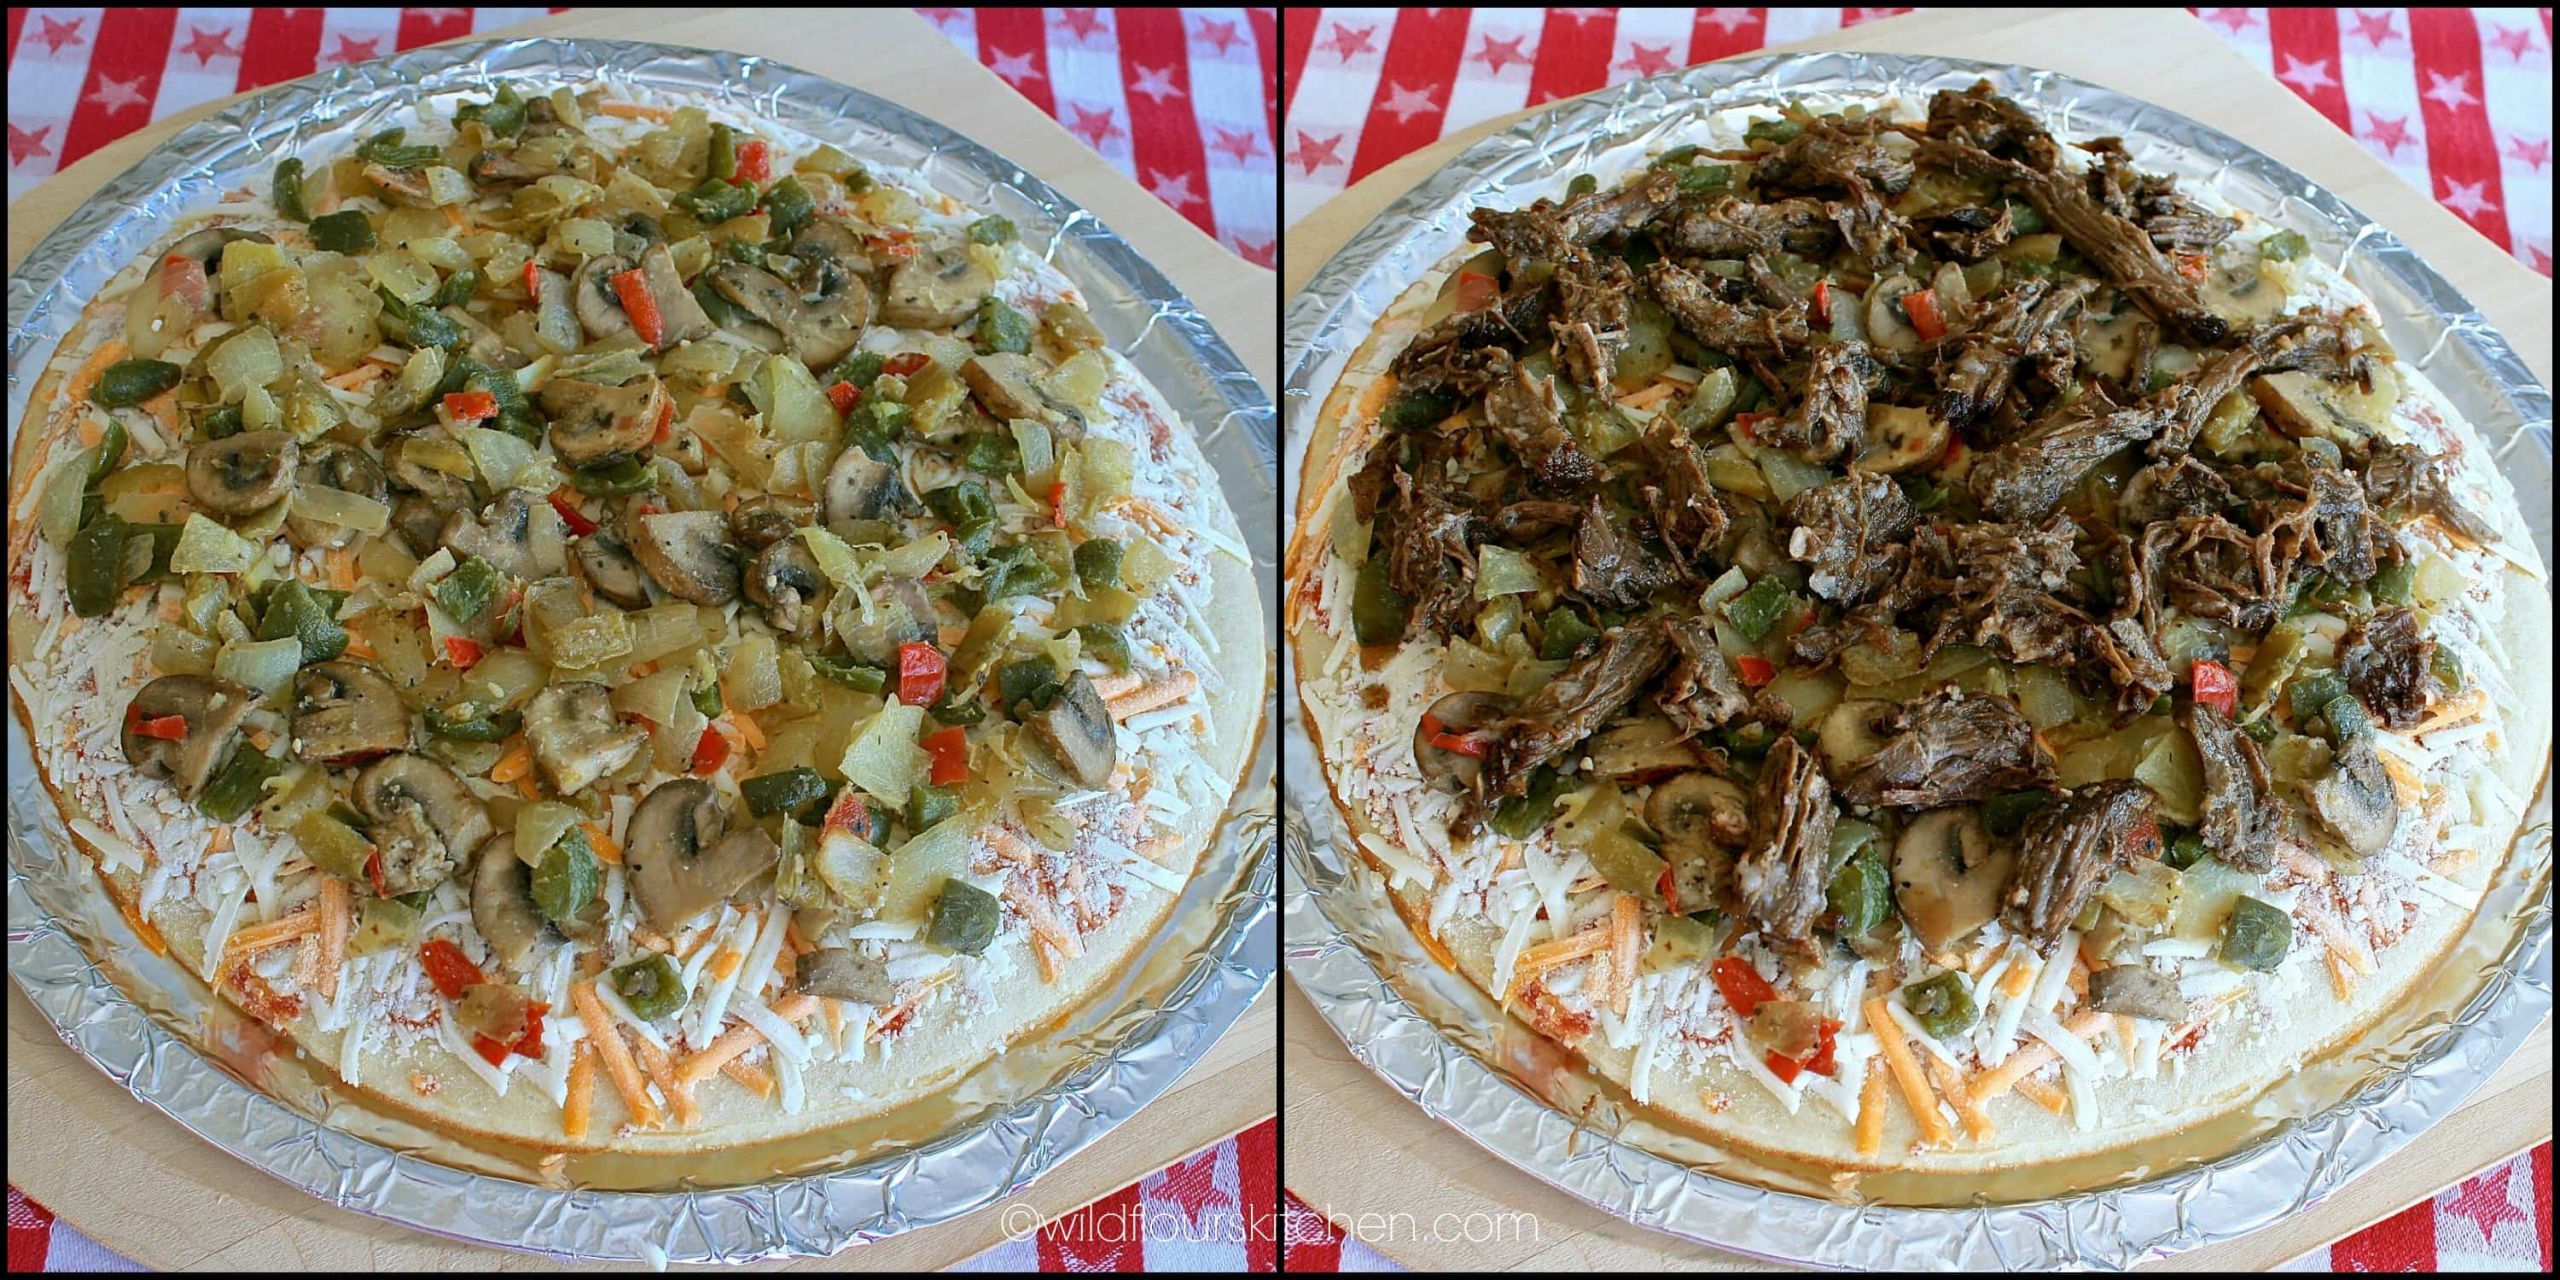 Italian Beef Pizza
 Chicago Style Italian Beef Pizza with Mushrooms Bells